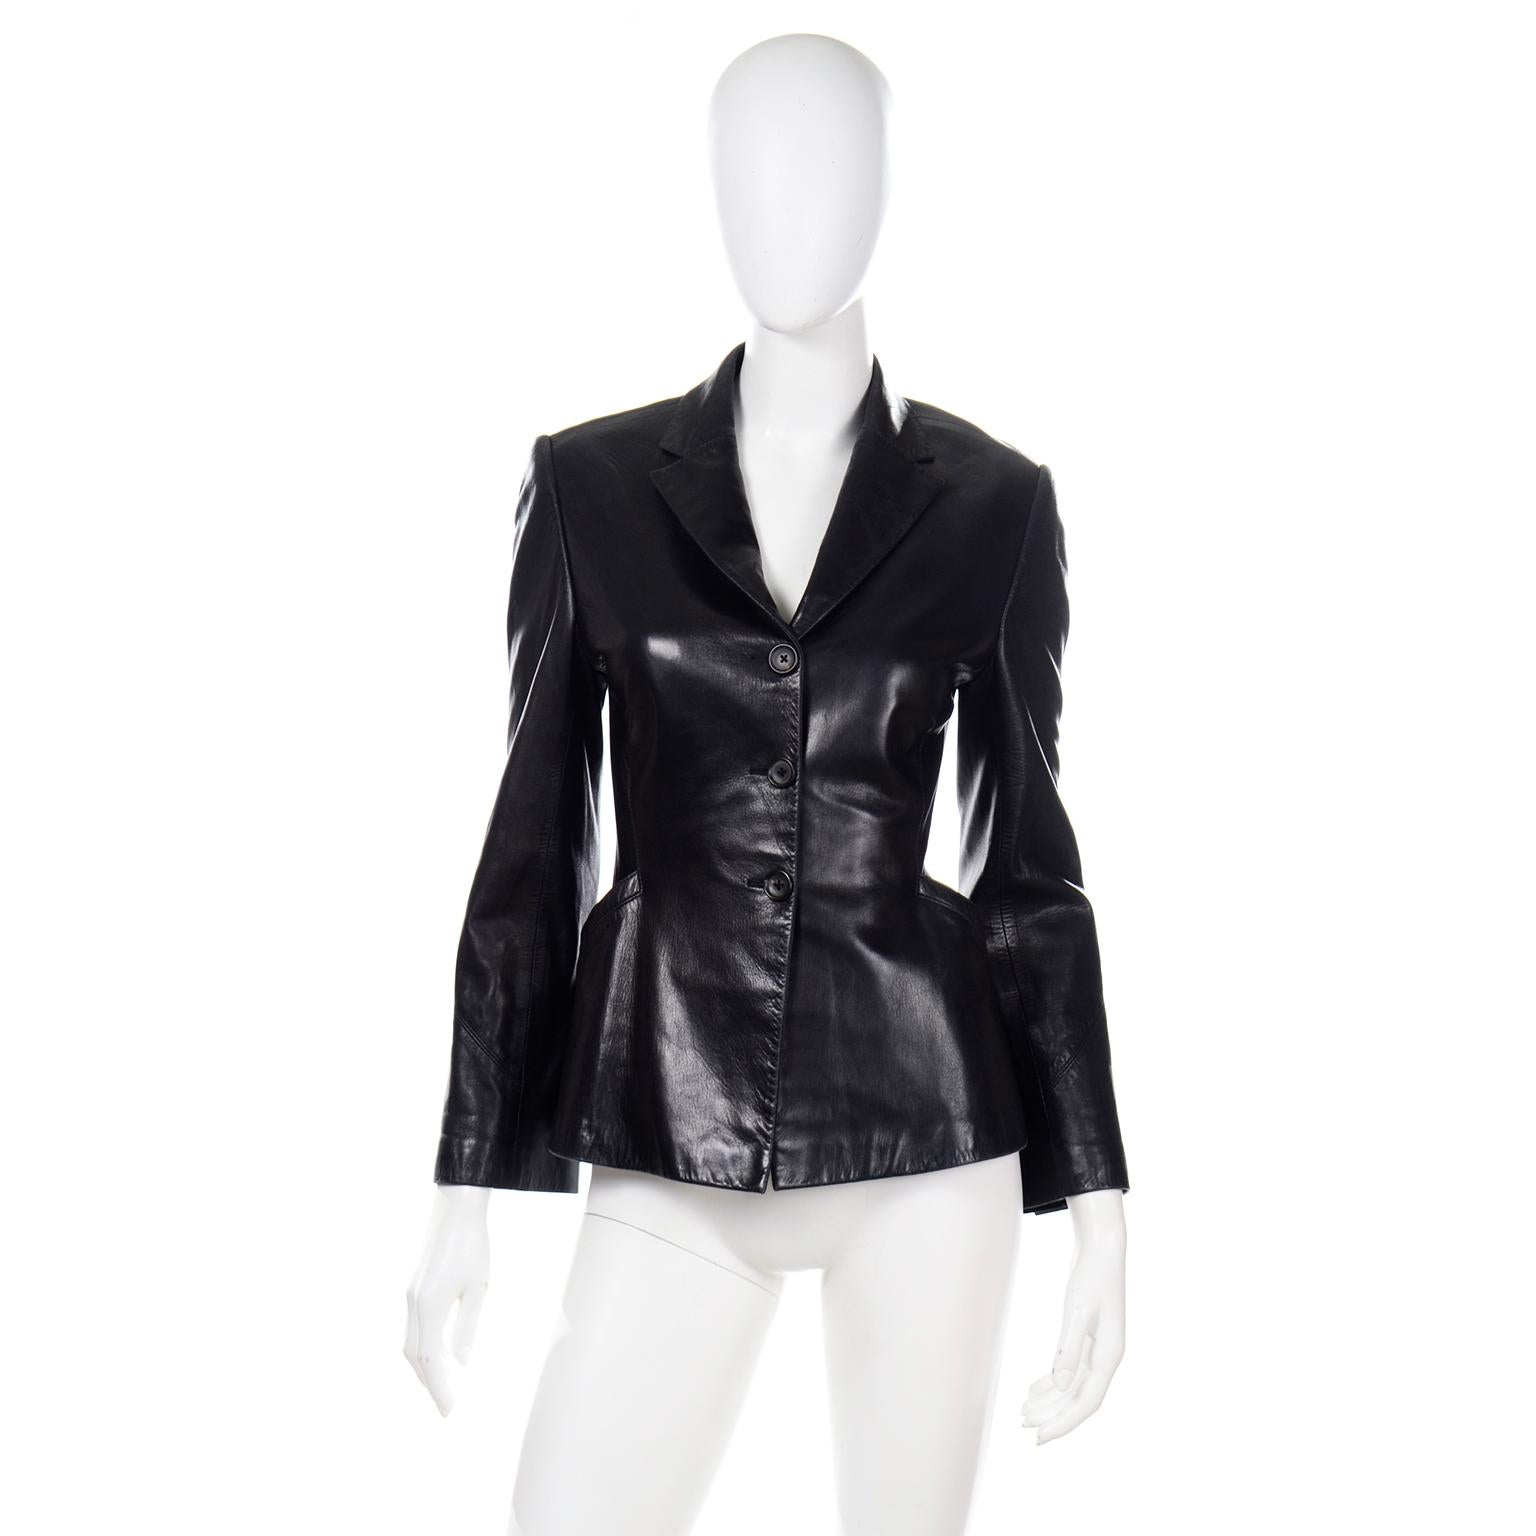 This is a super soft black leather Richard Tyler Couture vintage jacket. The jacket is styled like a blazer and has top stitched seams on the diagonal on the sleeves with diagonal slit pockets and a notched collar. The jacket buttons with 3 buttons